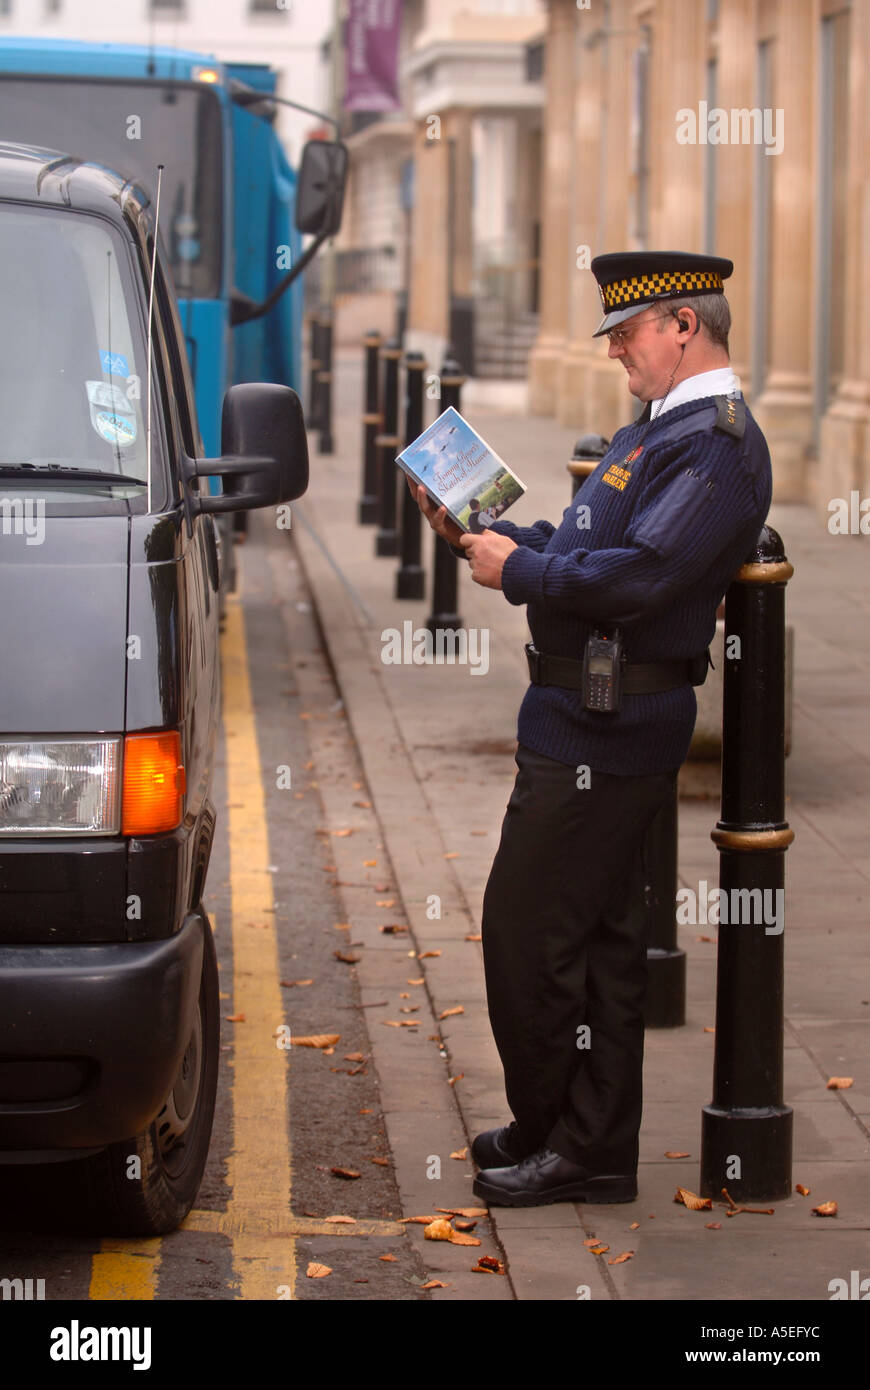 AN OFF DUTY TRAFFIC WARDEN READING AS PART OF THE BOOK DROP SCHEME AT THE CHELTENHAM LITERARY FESTIVAL UK Stock Photo